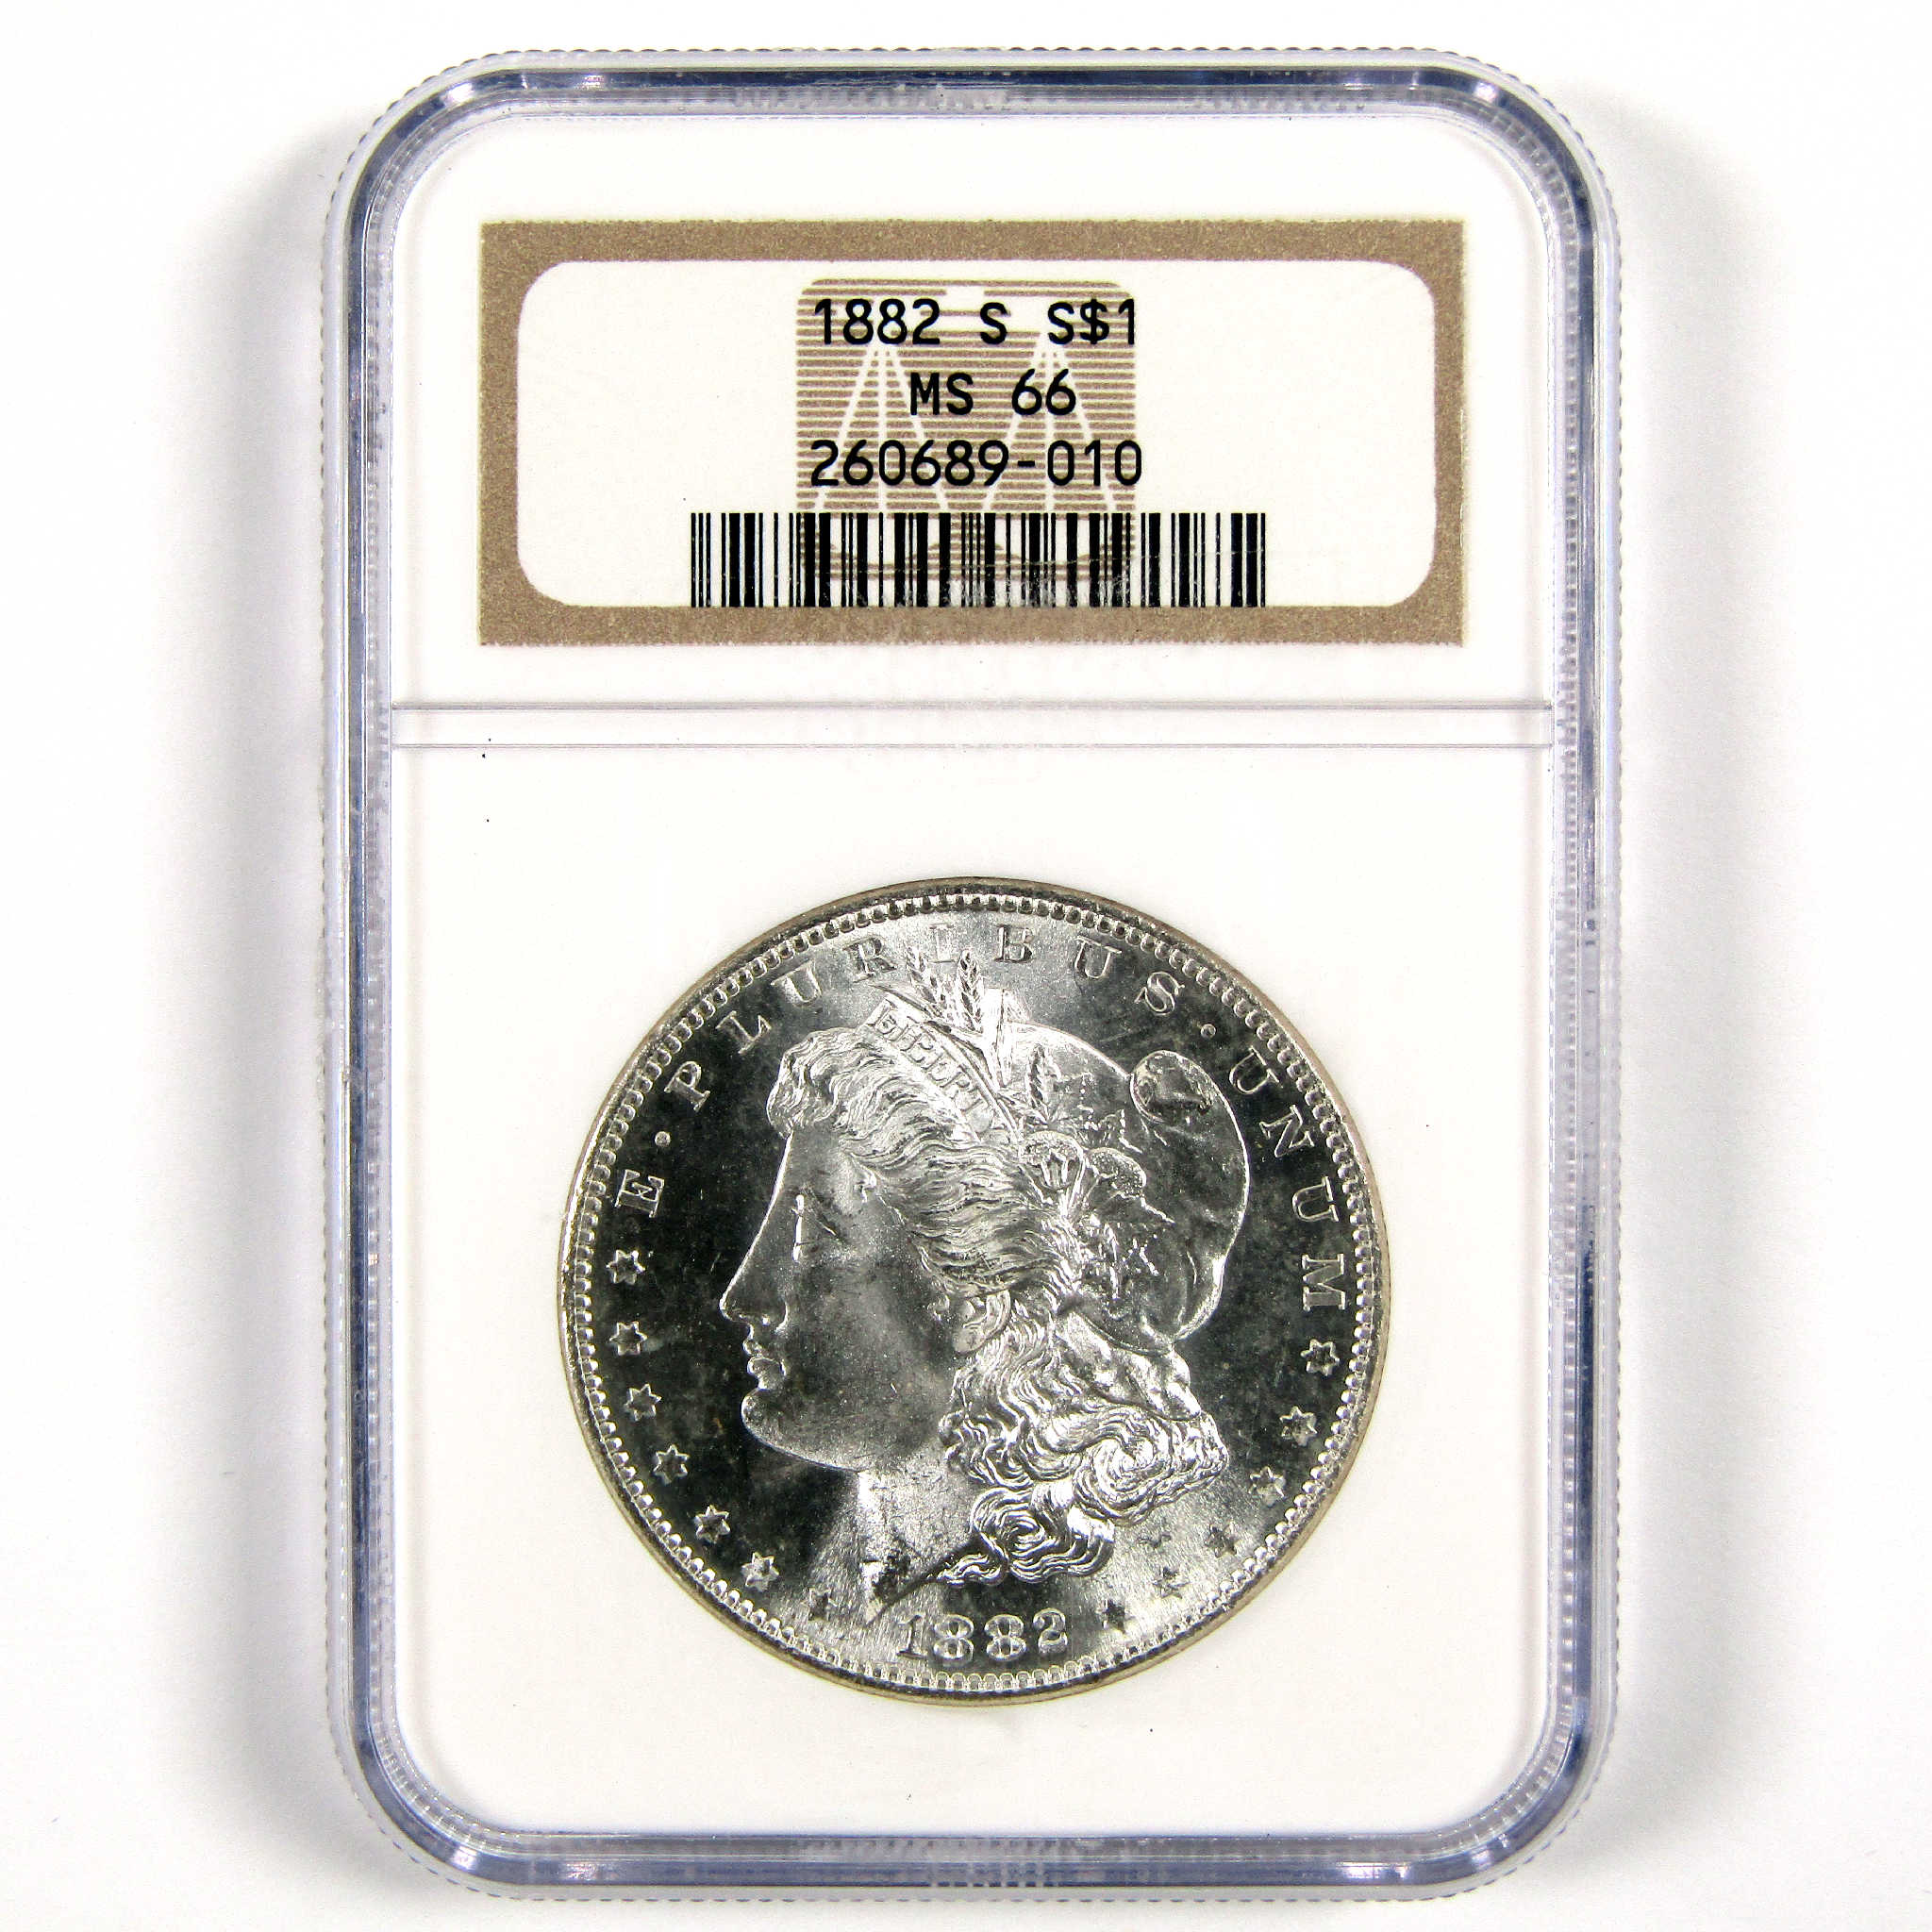 1882 S Morgan Dollar MS 66 NGC Silver $1 Uncirculated Coin SKU:CPC6239 - Morgan coin - Morgan silver dollar - Morgan silver dollar for sale - Profile Coins &amp; Collectibles